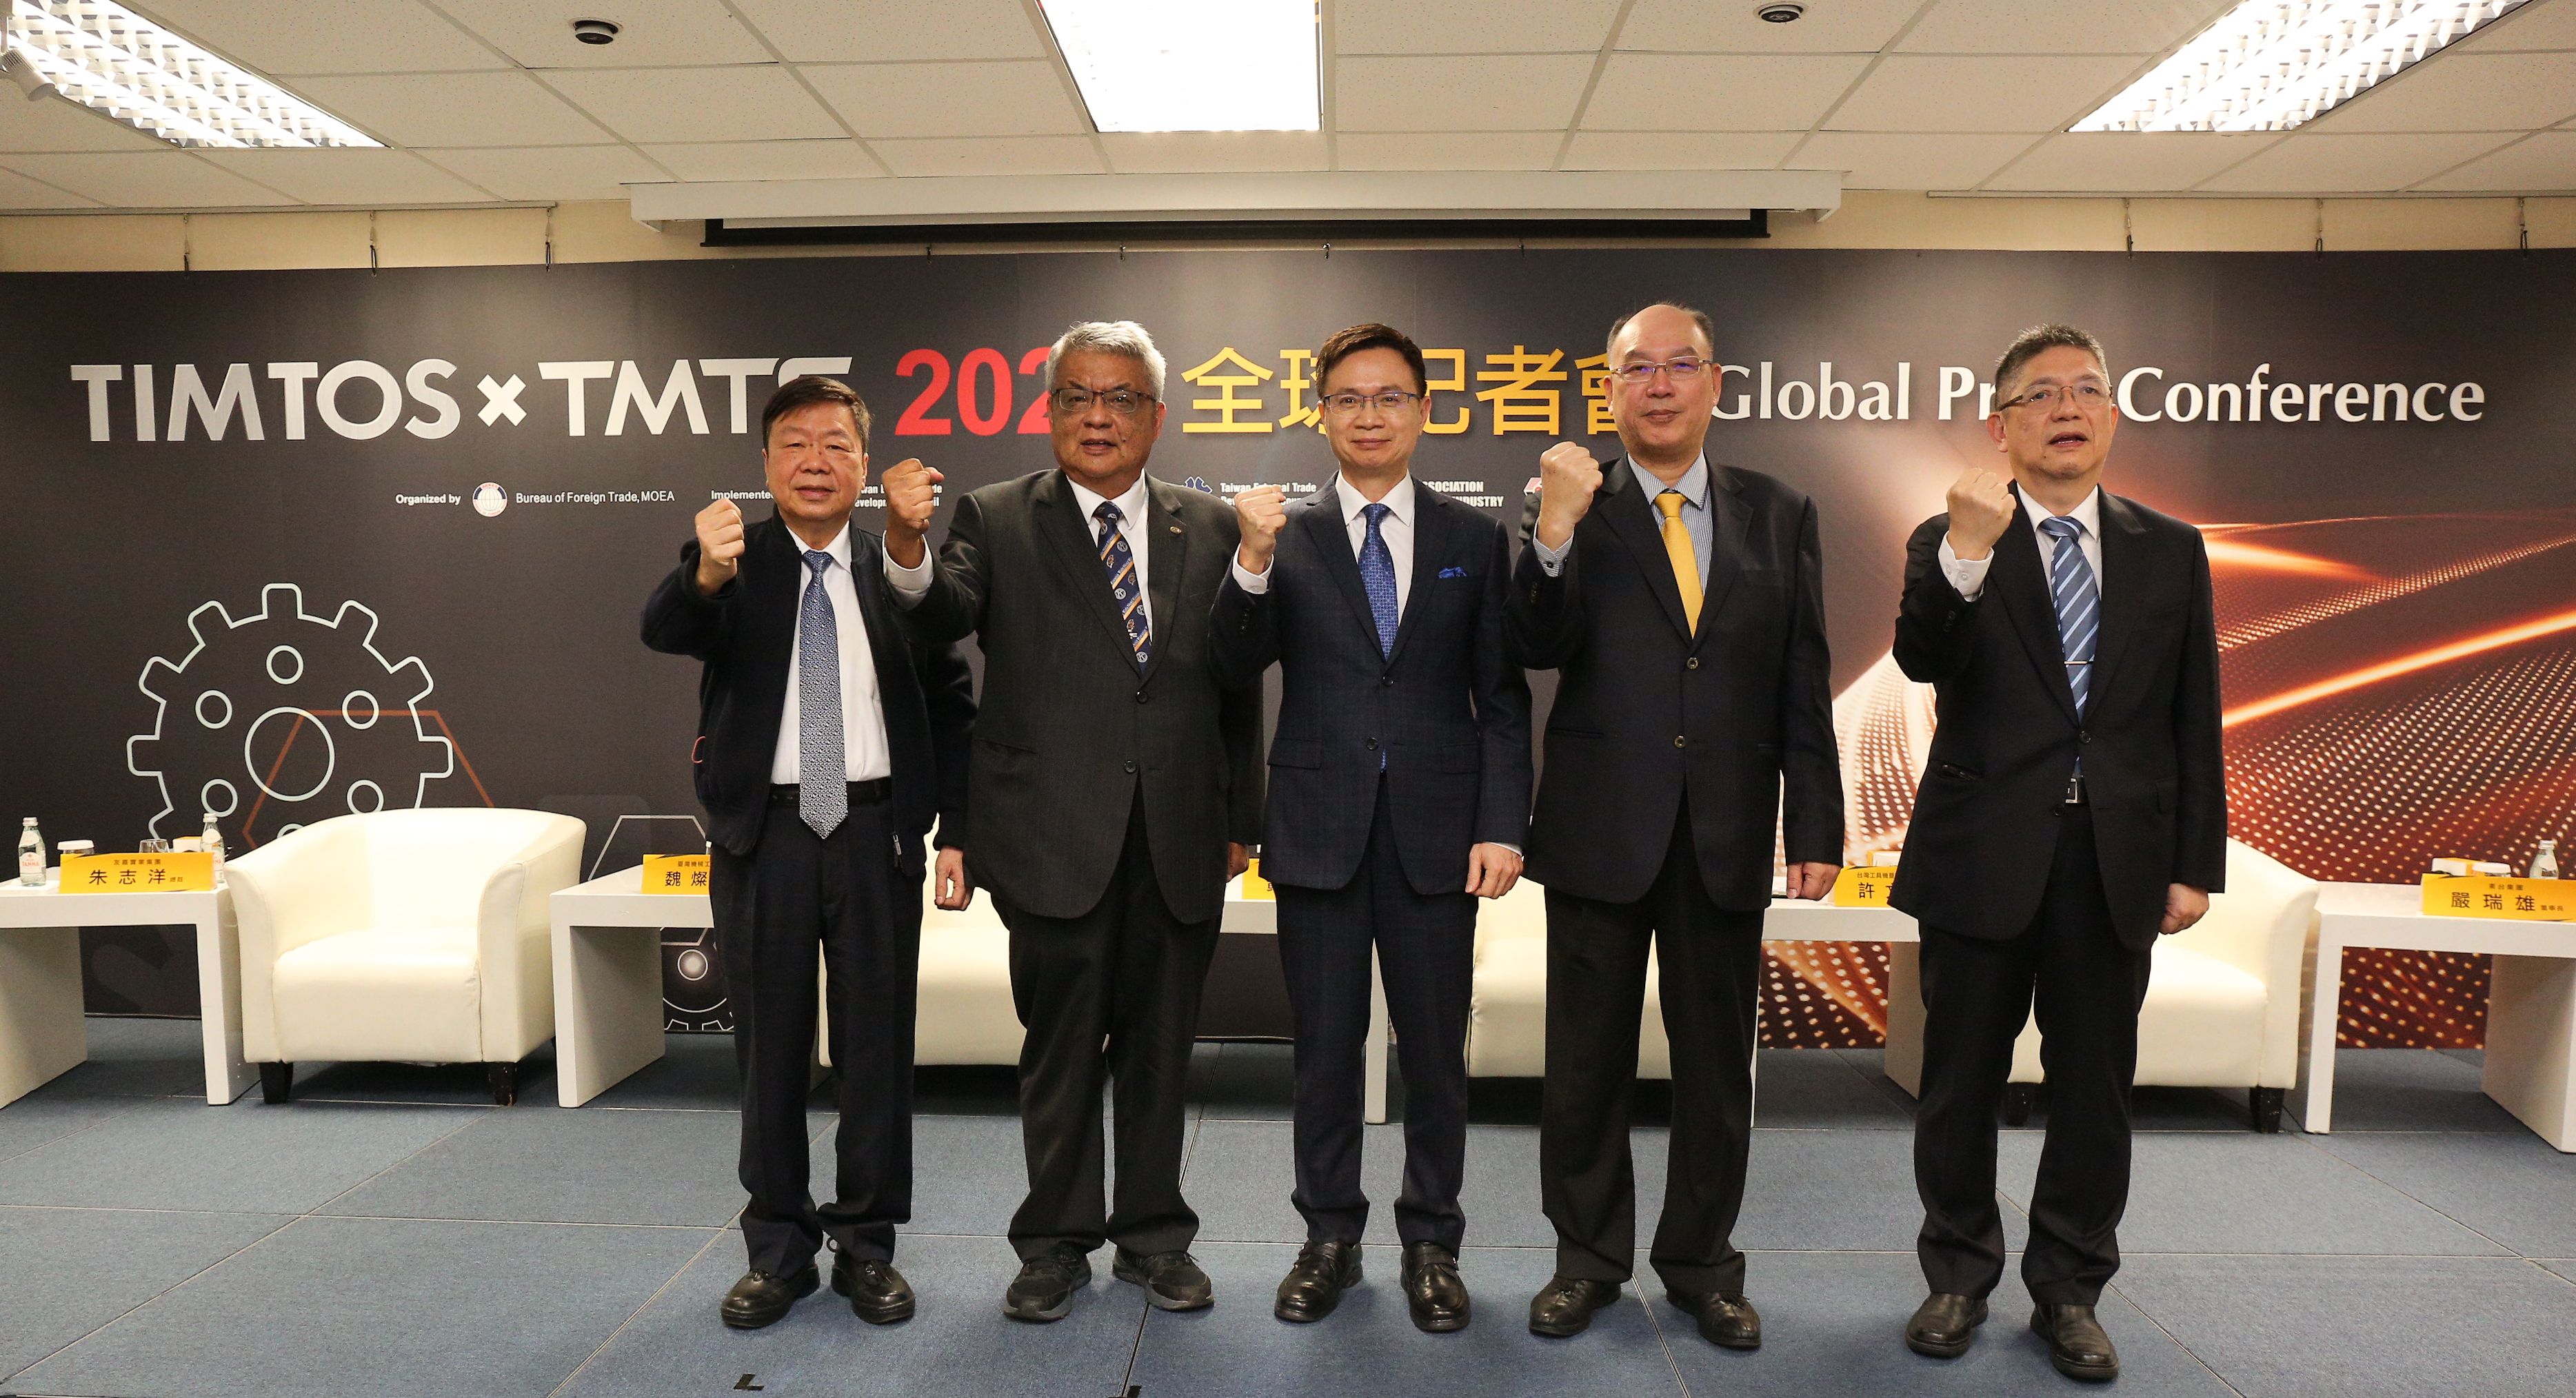 James C F. Huang, Chairman, TAITRA, Larry Wei, Chairman, TAMI and Harbor Hsu, Chairman, TMBA, Jimmy Chu, Chairman, Fair Friend Group and Jui-Hsiung Yen, Chairman of TTGroup addressed the international press interaction.